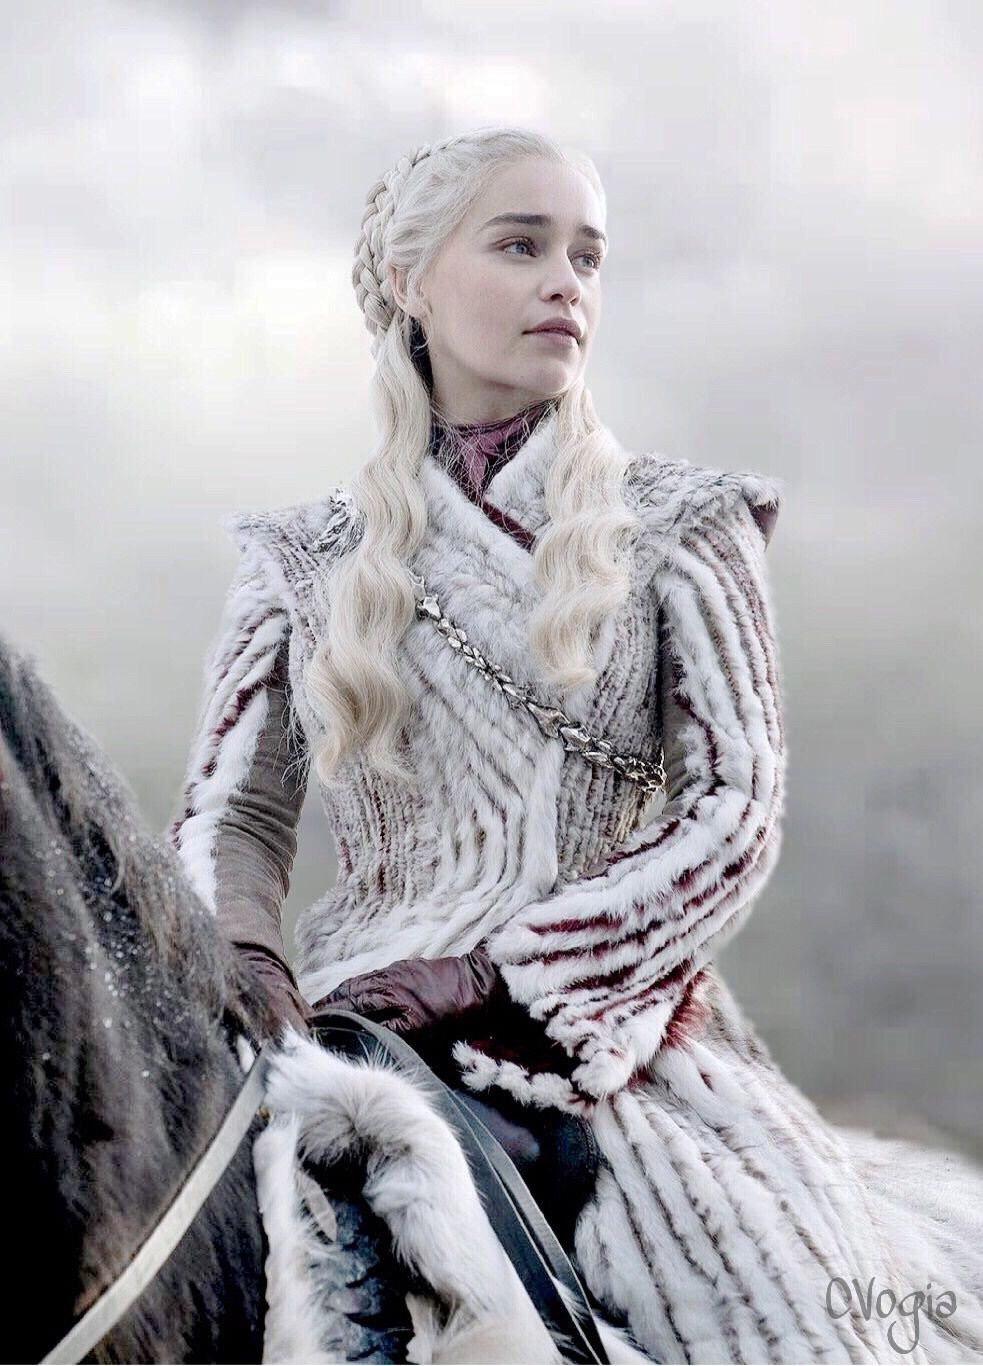 Shes ing back probably you all have already noticed that sam said that drogon was spotted near volantis in se dont forget who lives there kinvara ðð cant wait to see